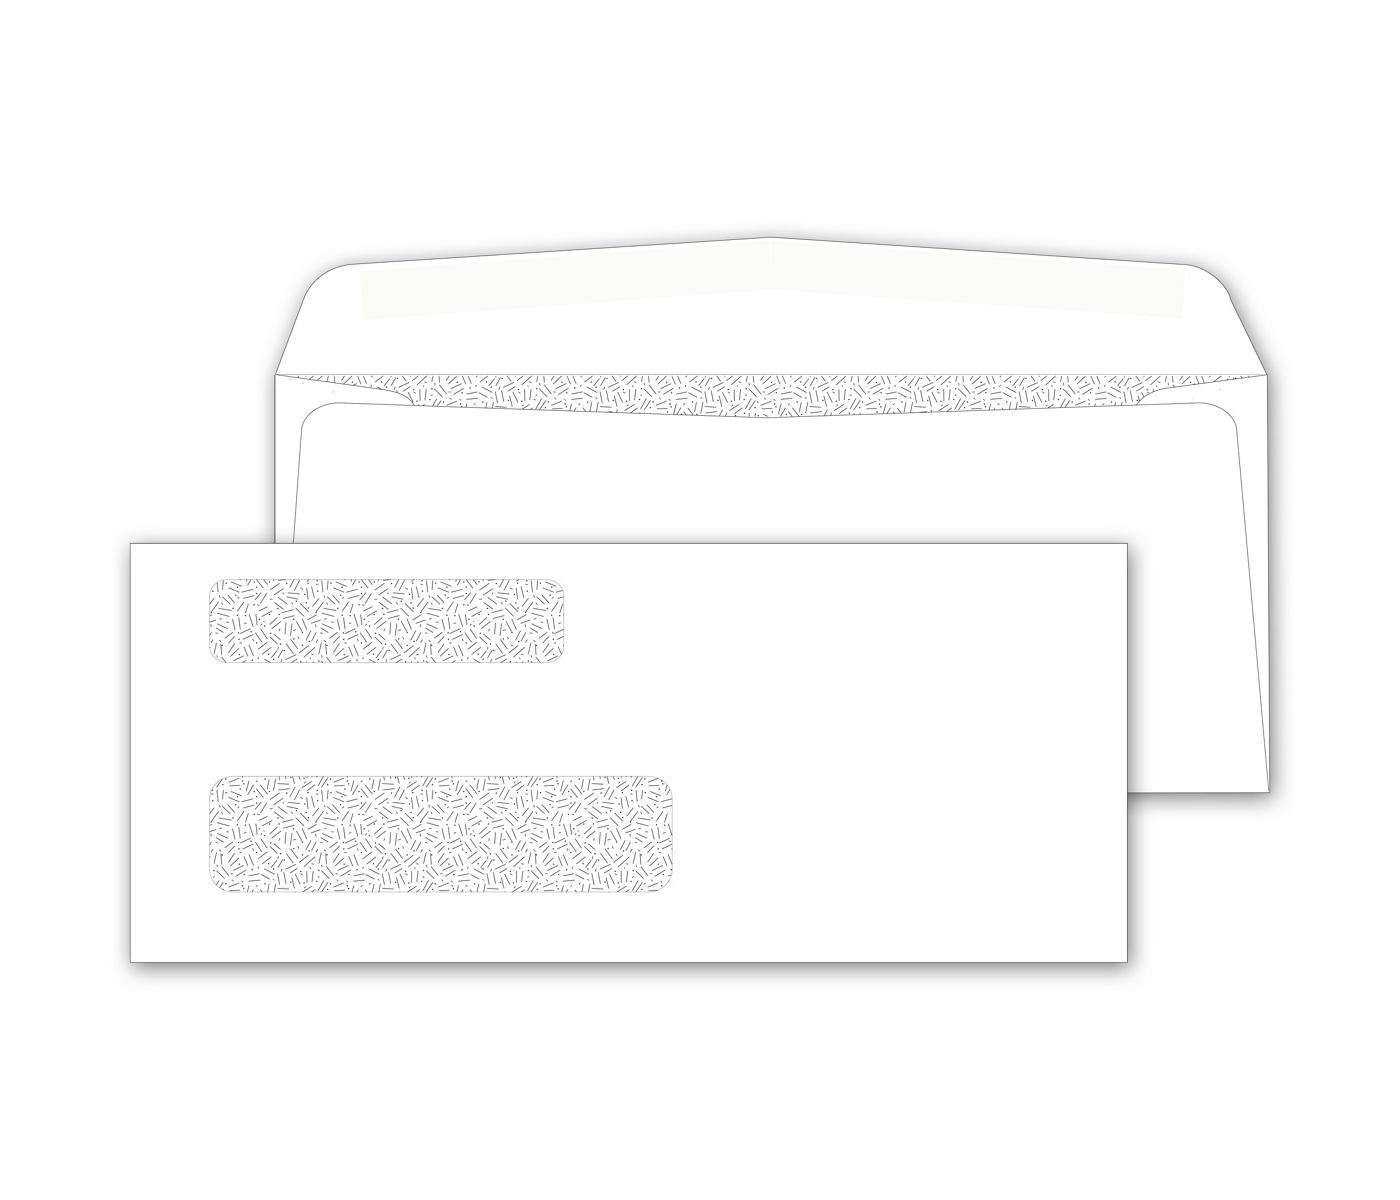 Double Window Confidential Envelope Not Imprinted